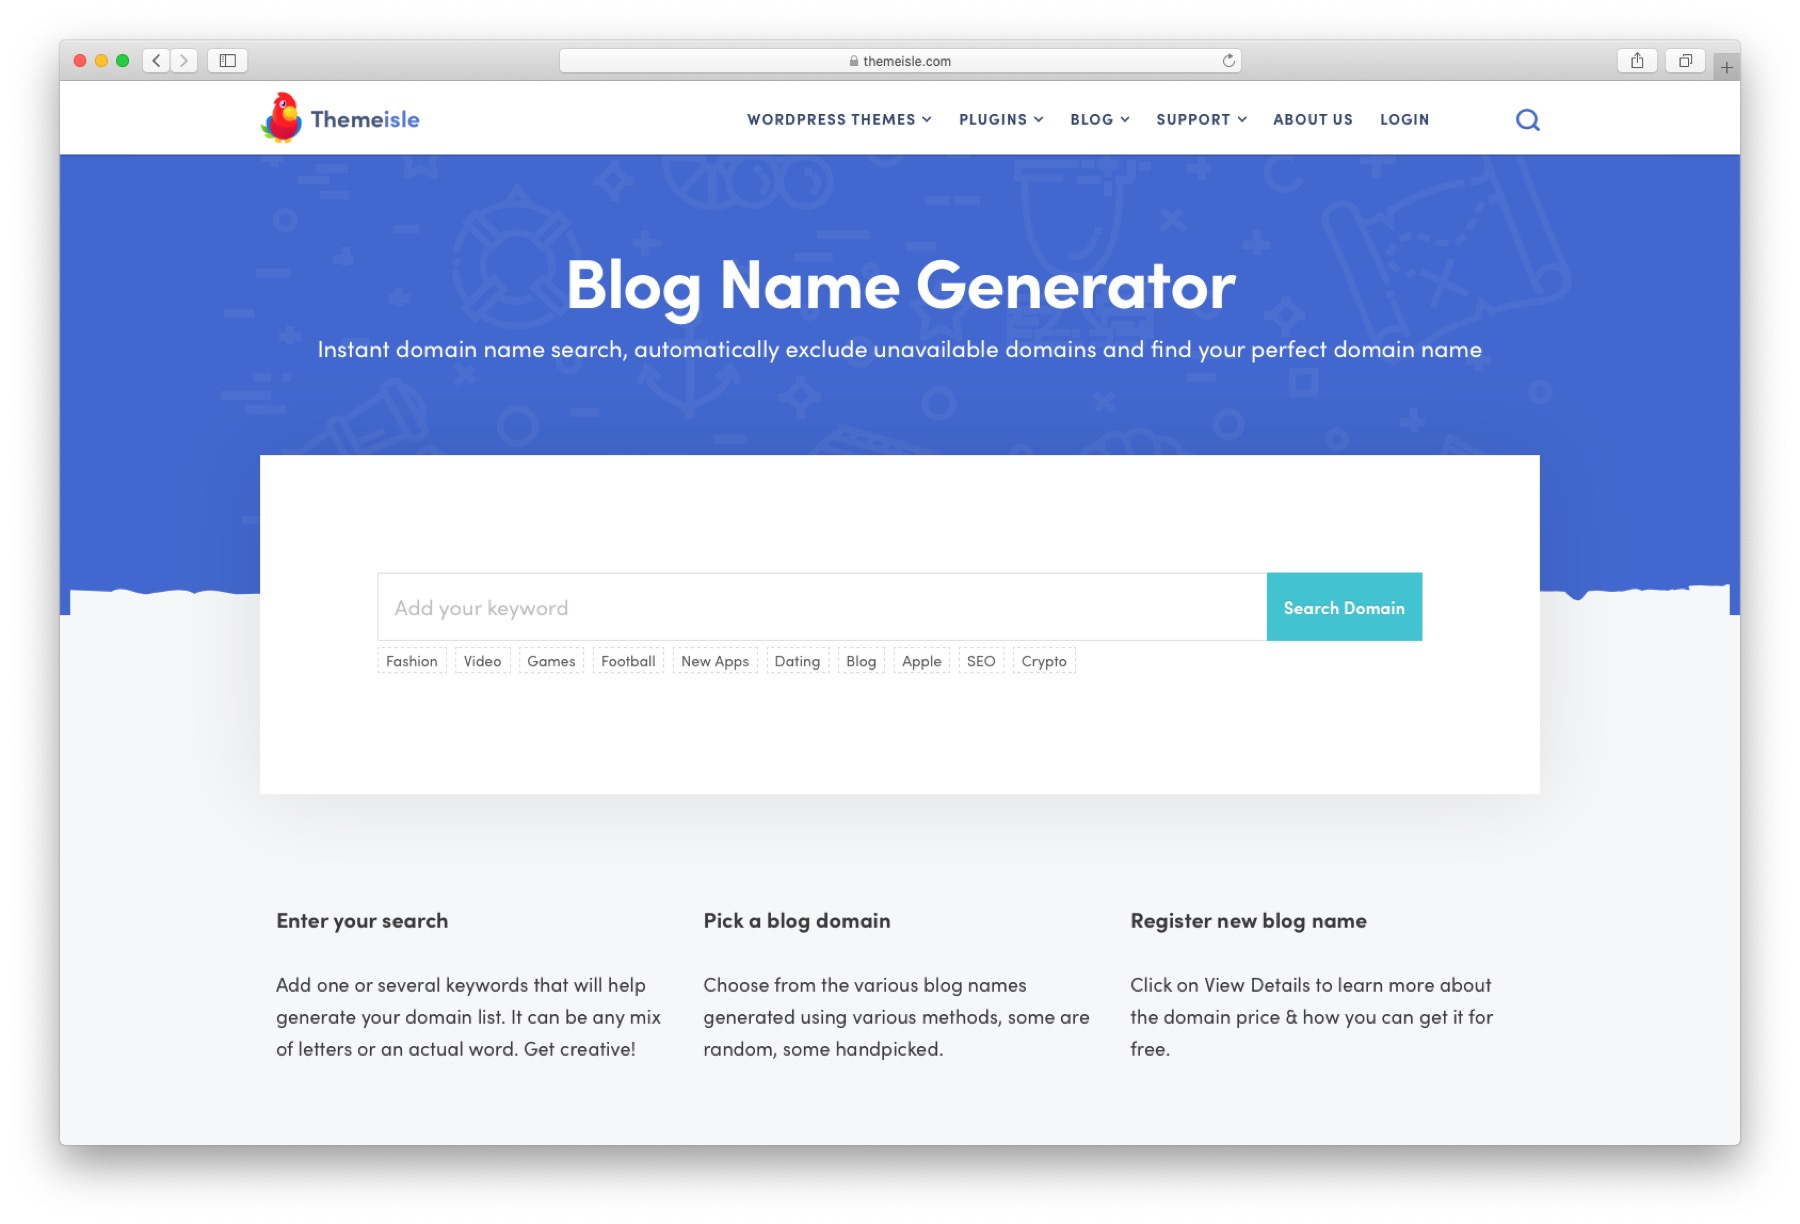 11 Best Blog Name Generators To Find Good Blog Name Ideas In 2021